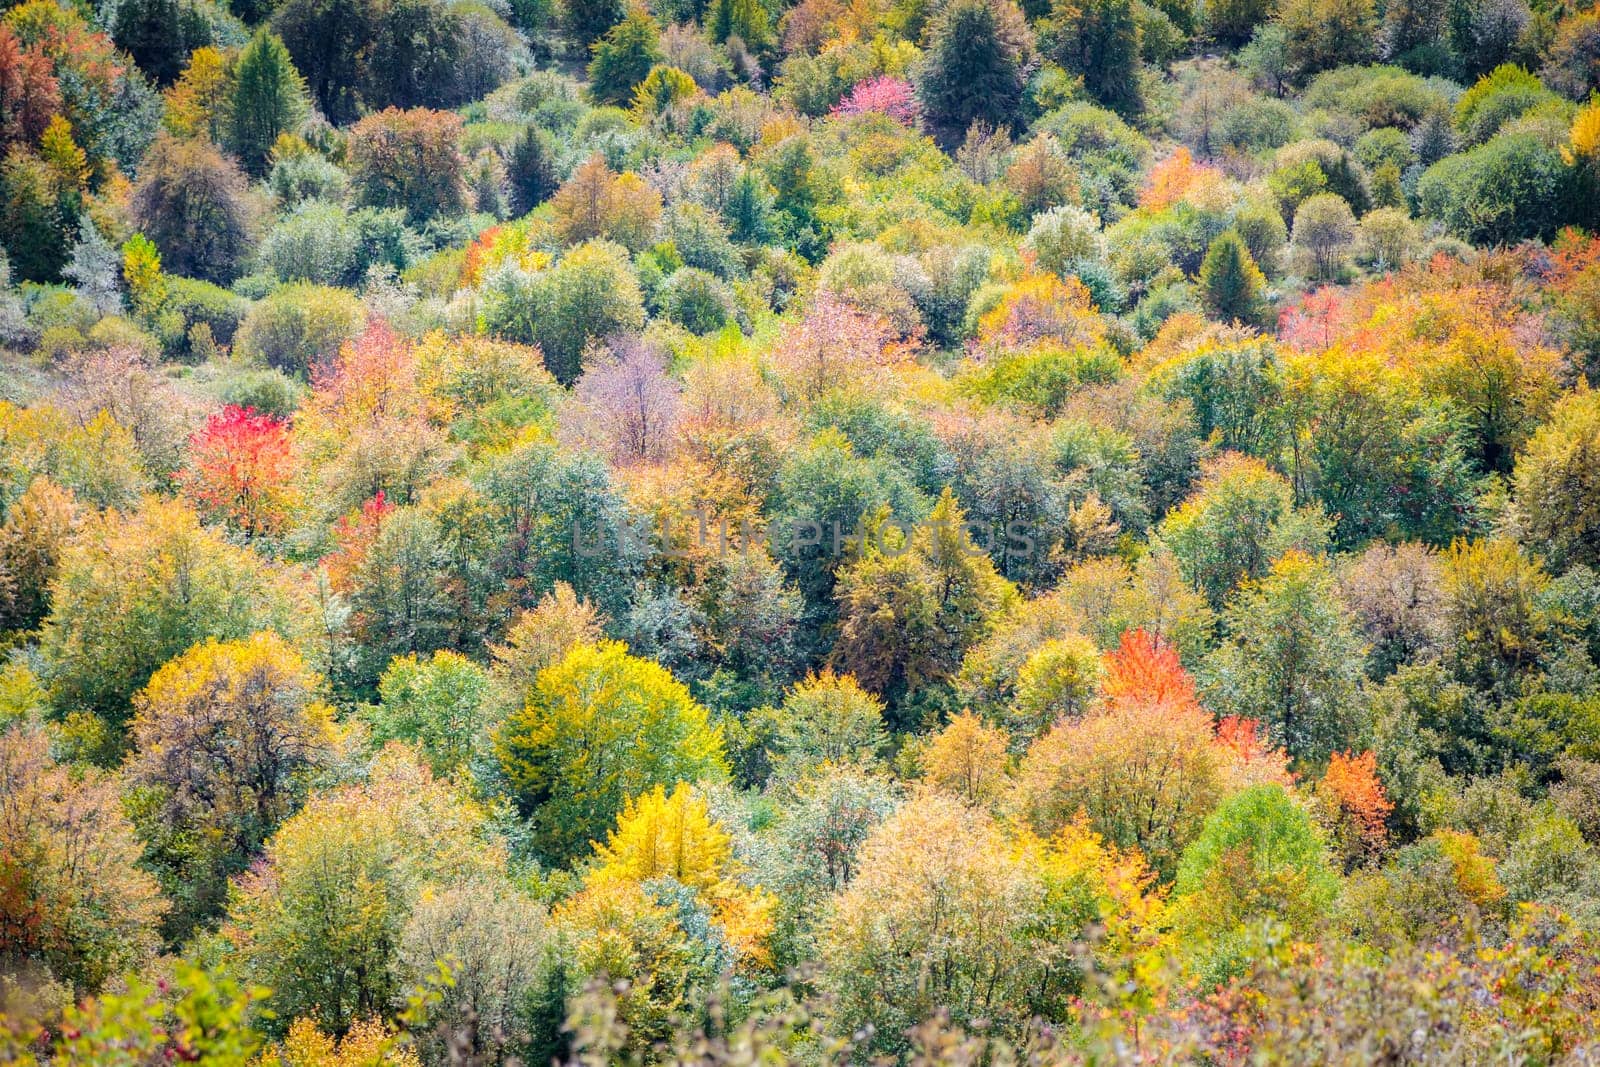 Scenic Mountain Range with Multicolored Autumn Trees Creating a Beautiful Landscape by Yurich32